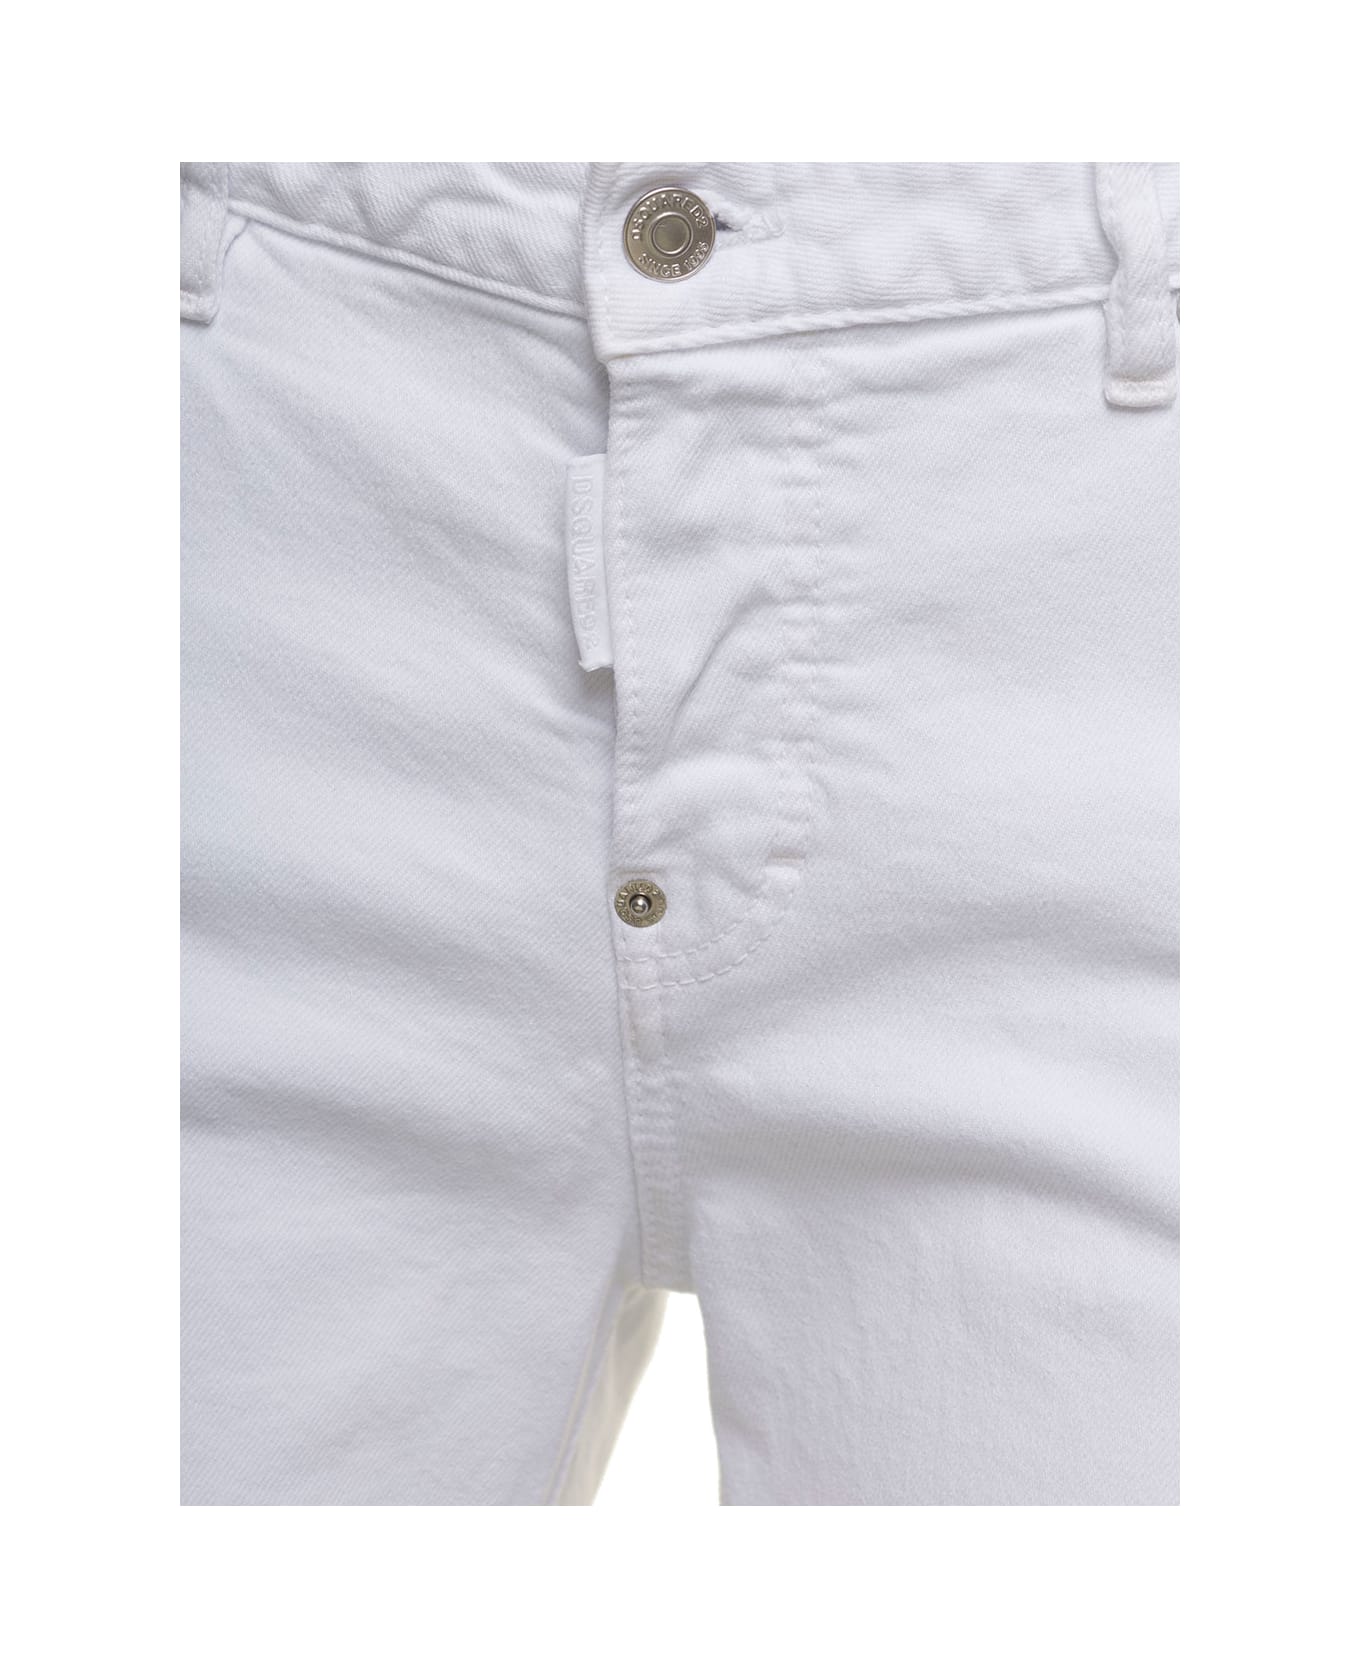 Dsquared2 'cool Girl' White Skinny Jeans In Stretch Cotton Denim Woman Dsquared2 - White